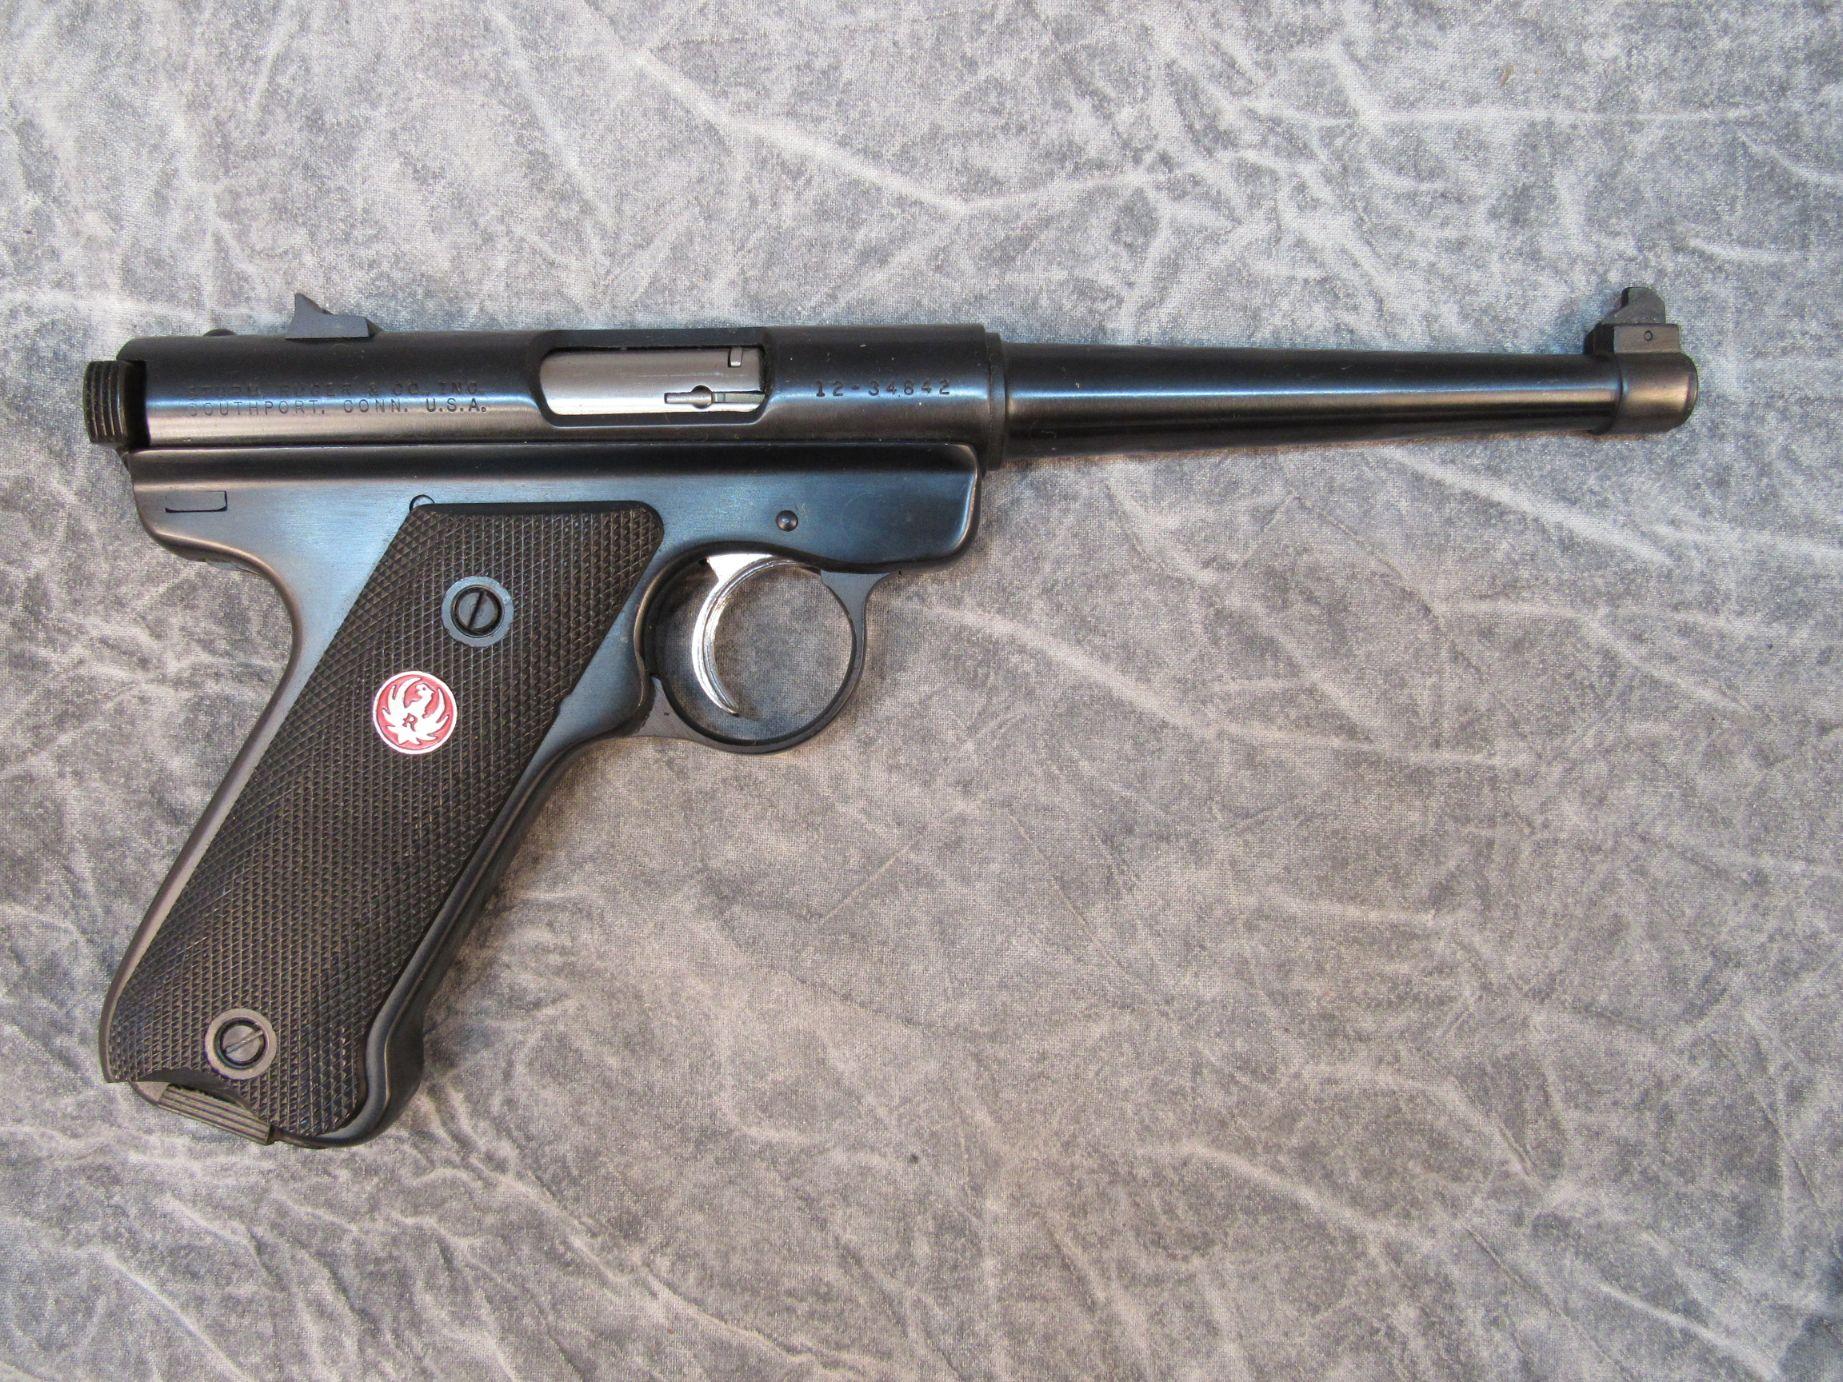 Ruger Mark II Semiautomatic Pistol